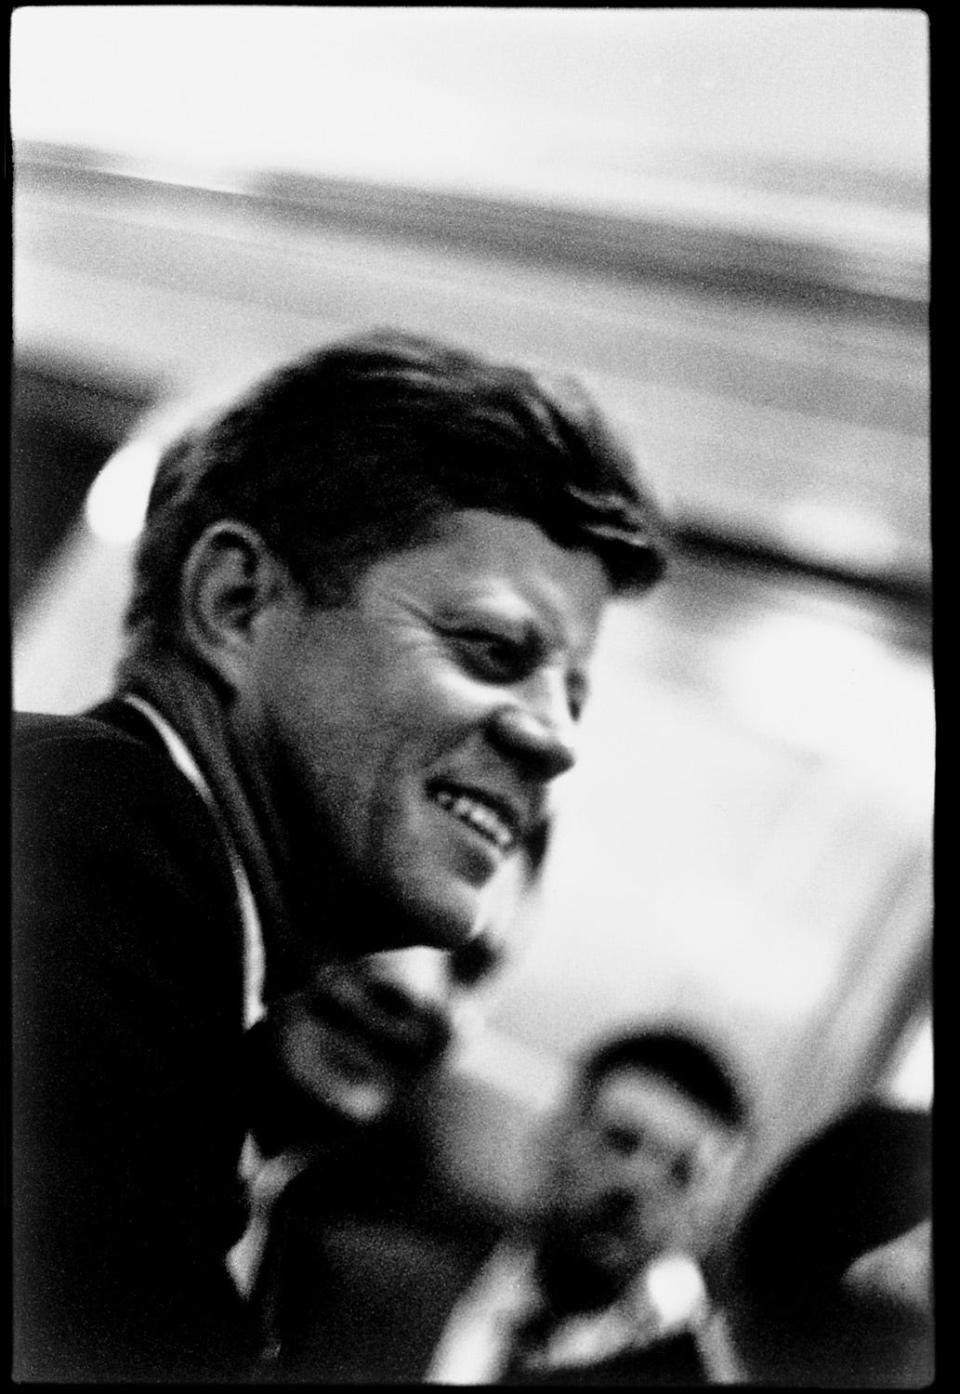 President John F. Kennedy: "Ask not what your country can do for you. Ask what you can do for your country."